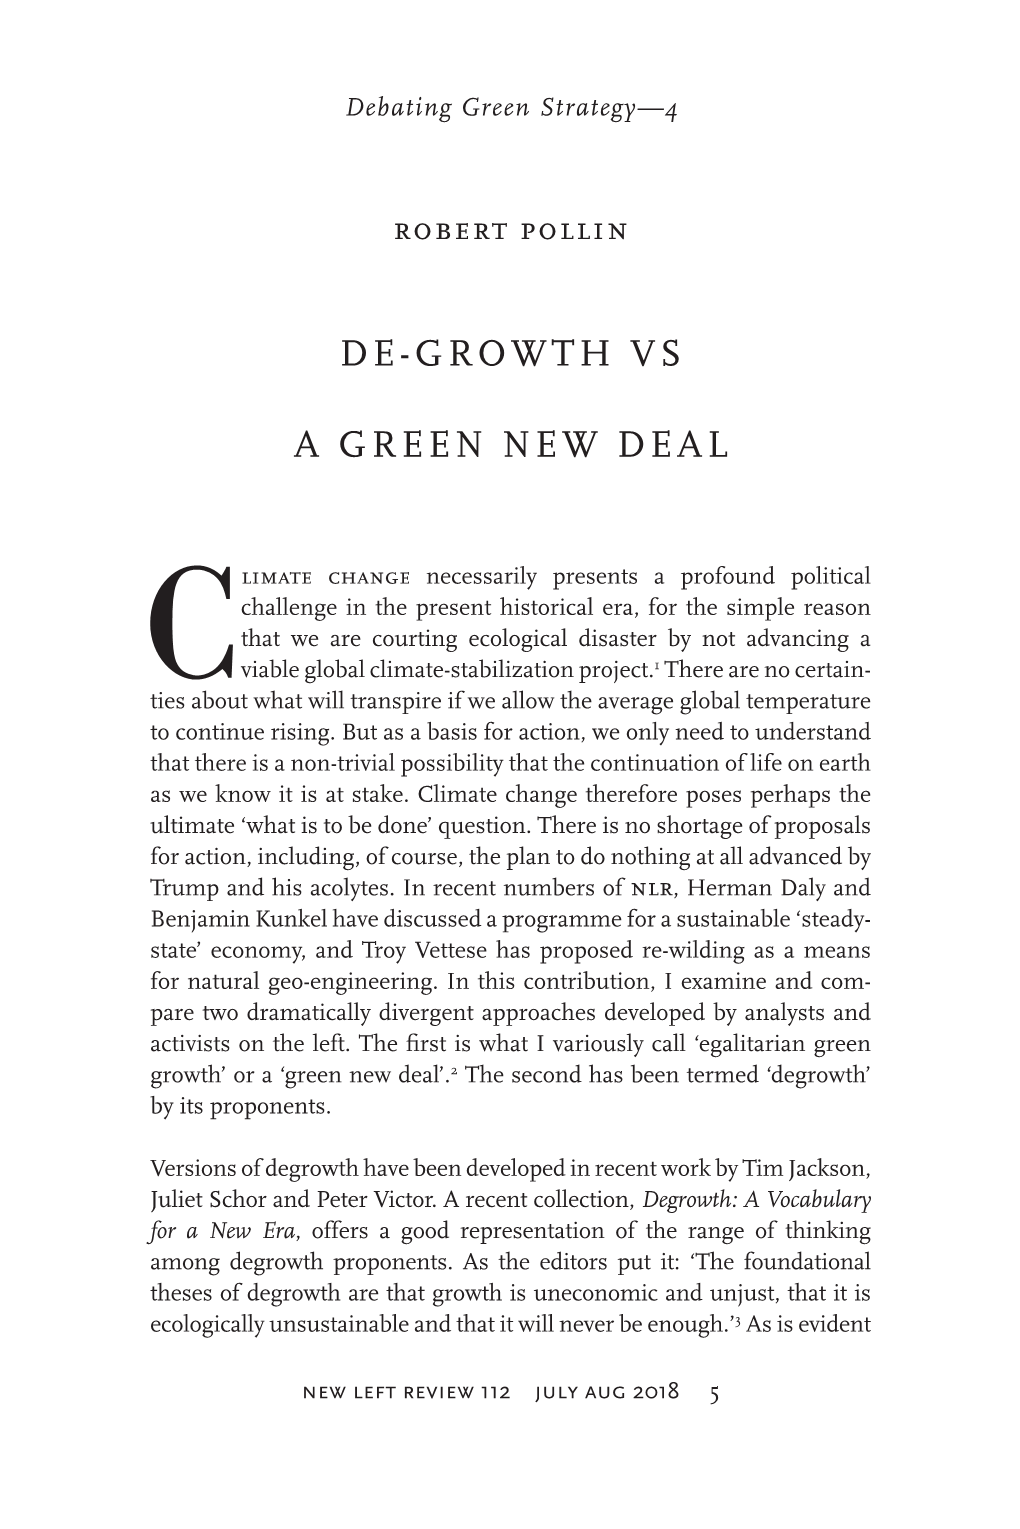 Degrowth Vs a Green New Deal